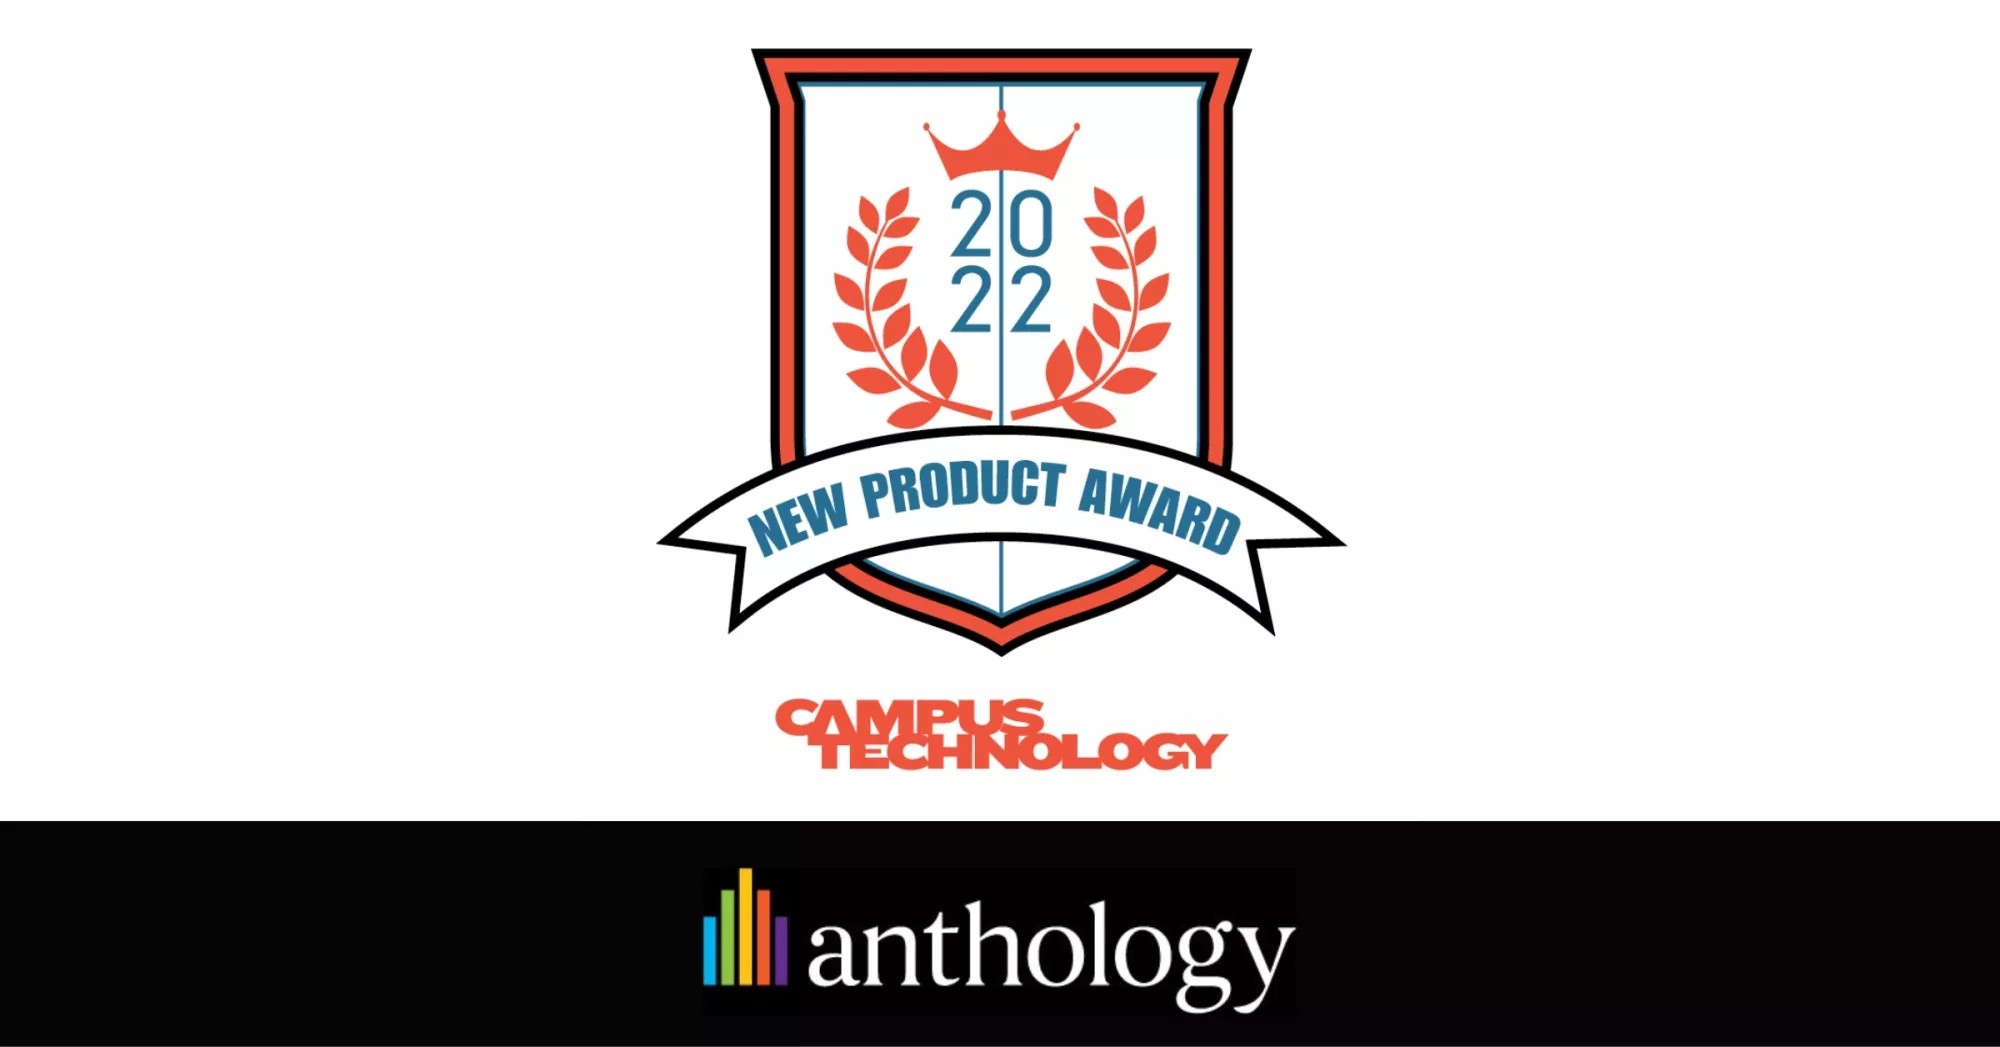 2022 New Product Award Campus Technology